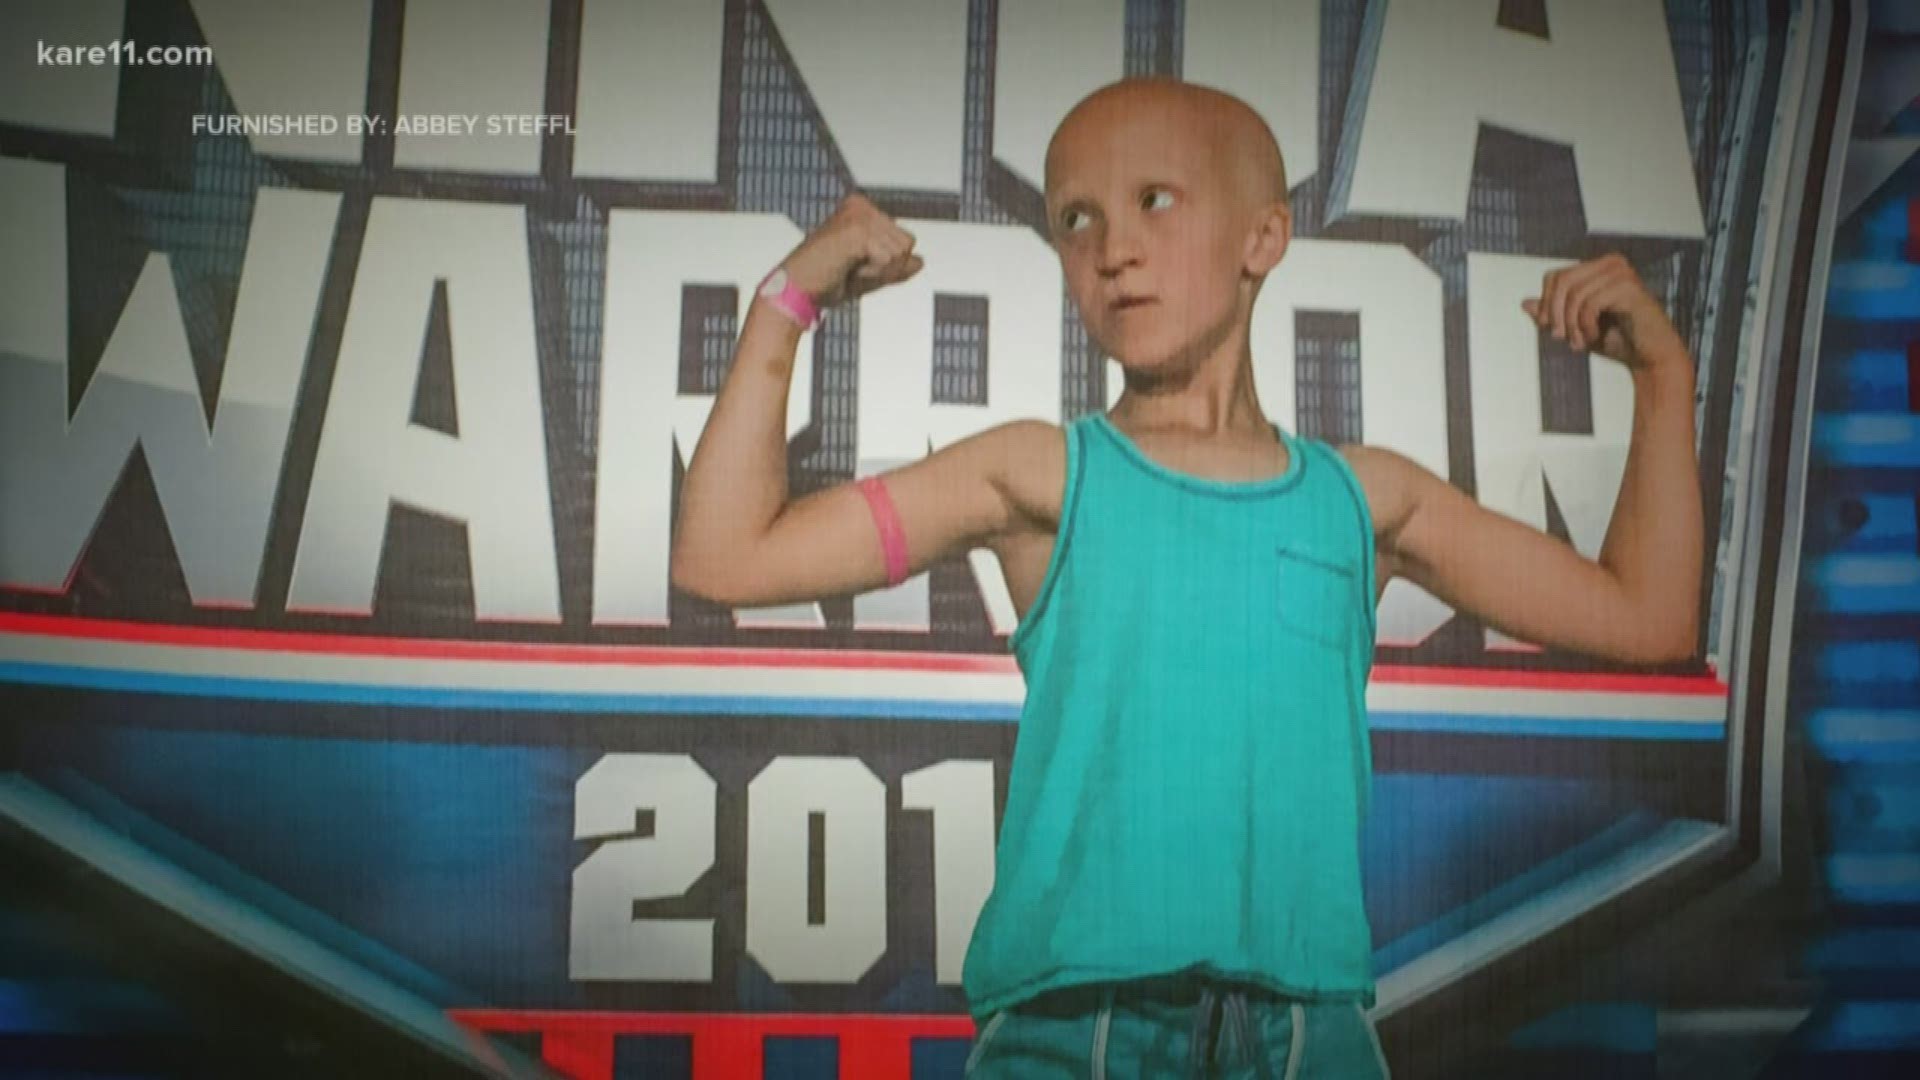 NBC featured a little girl on American Ninja Warrior a few weeks ago because they found her story so inspiring.